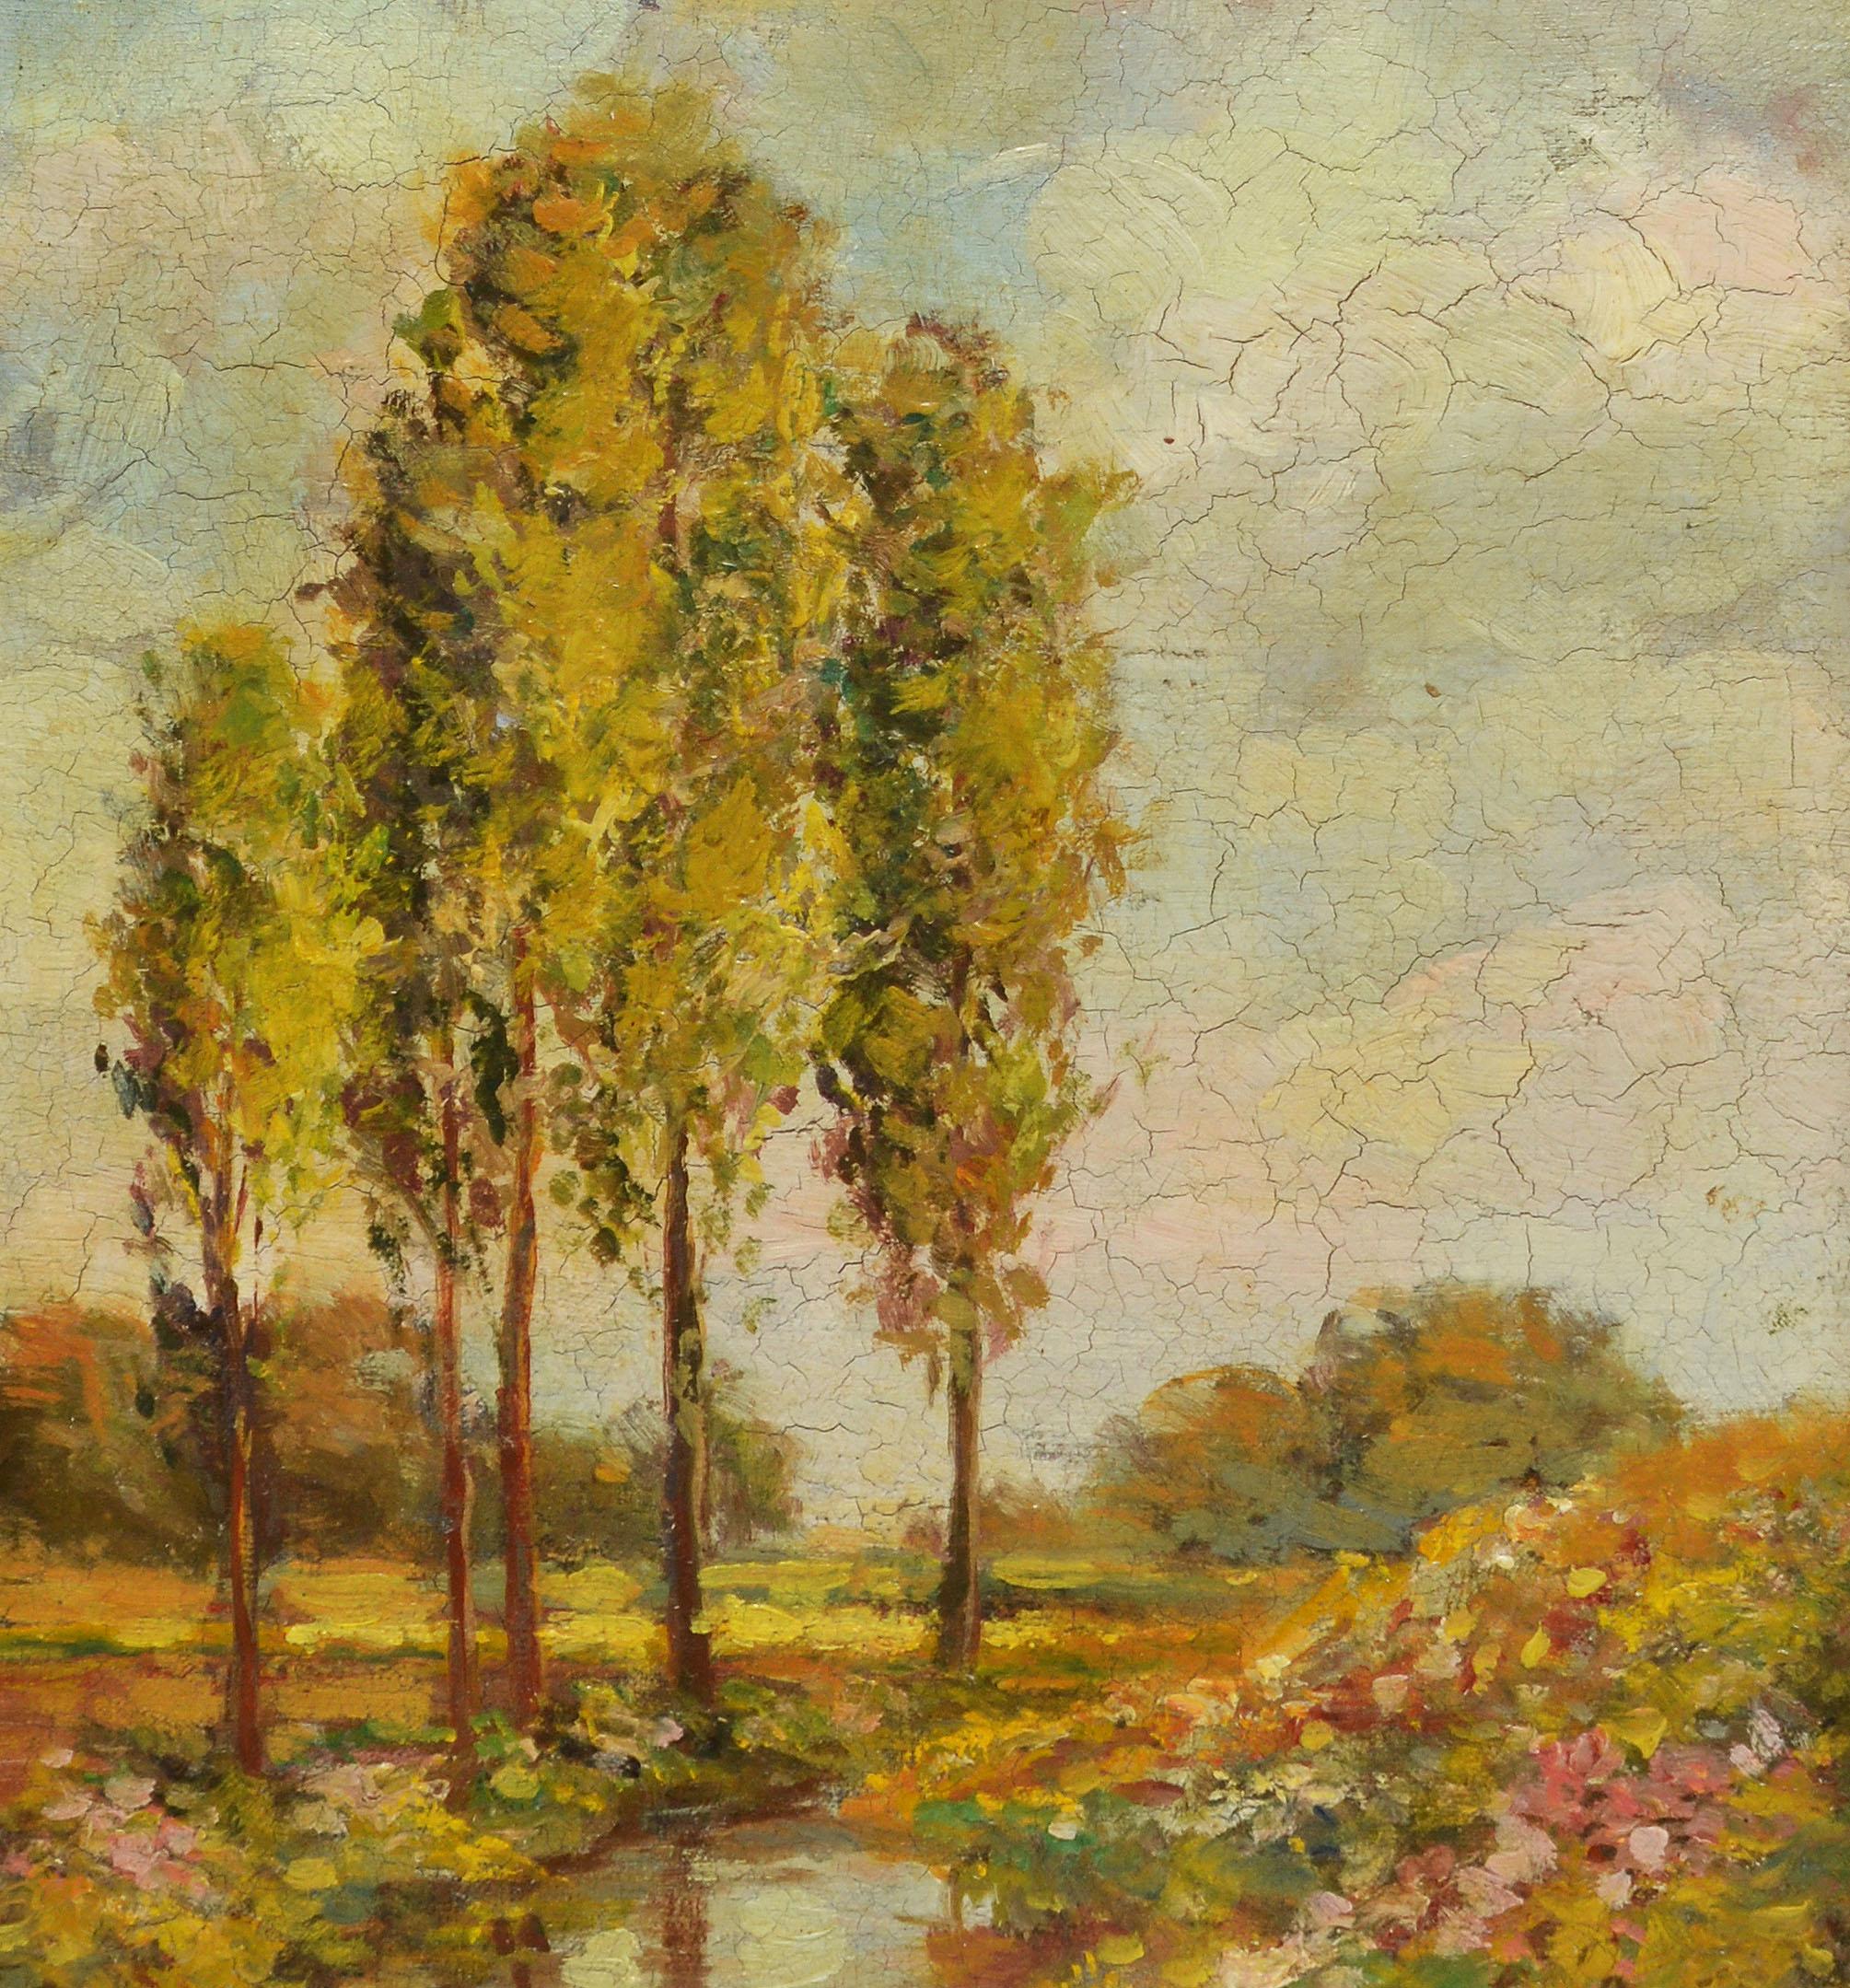 Impressionist landscape with flowers by Ben Foster  (1852 - 1926).  Oil on board, circa 1890.  Signed lower right.   Displayed in a giltwood frame.  Image size, 10